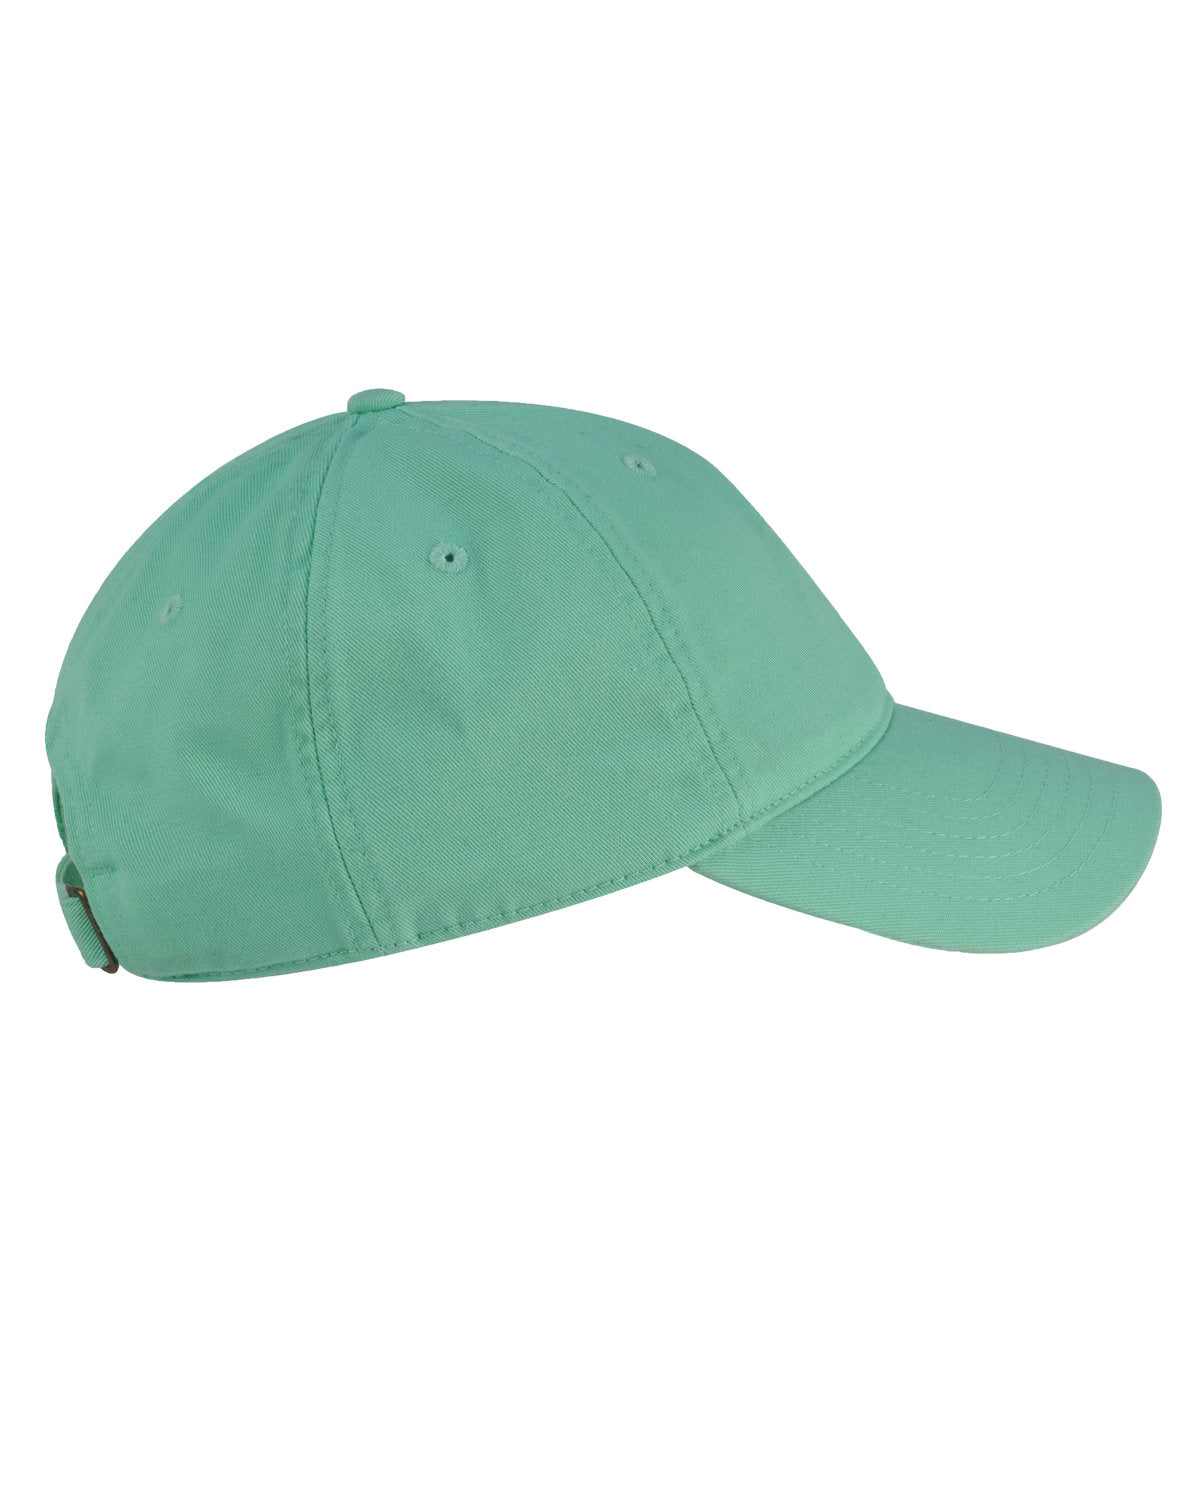 Customizable Econscious Organic Cotton Unstructured Baseball Hat in mint.